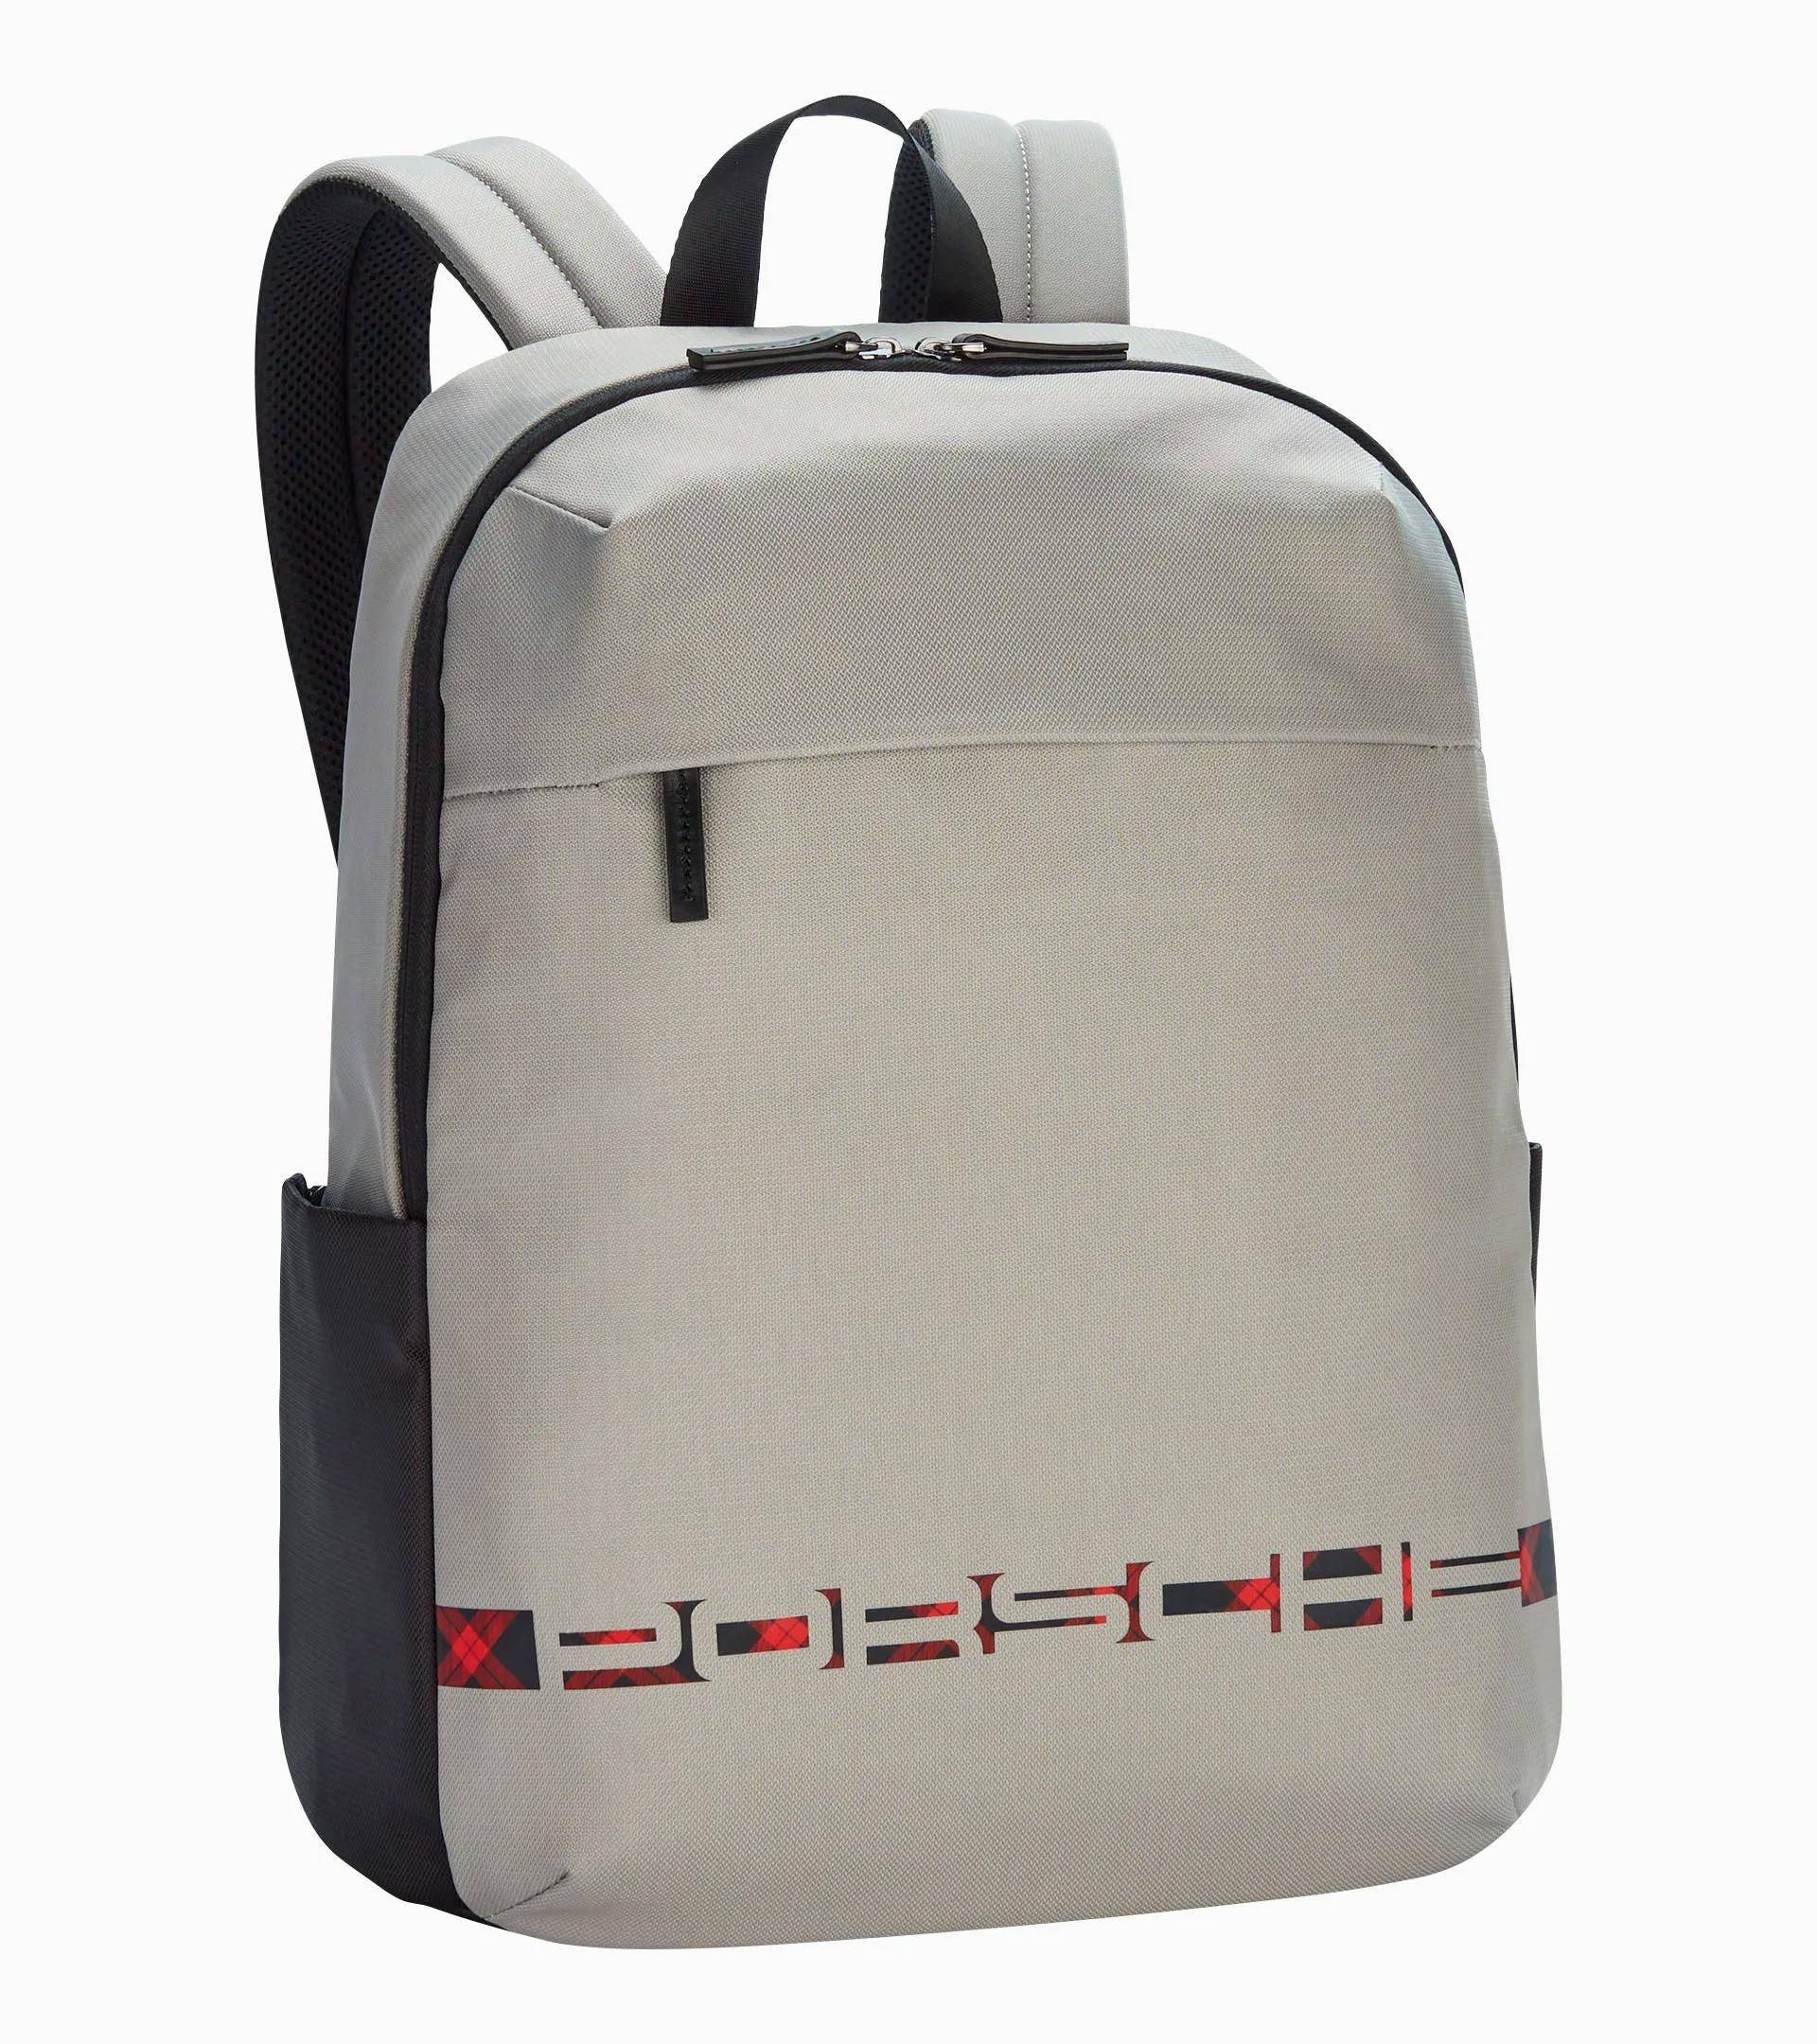 Backpack – Turbo No. 1 1